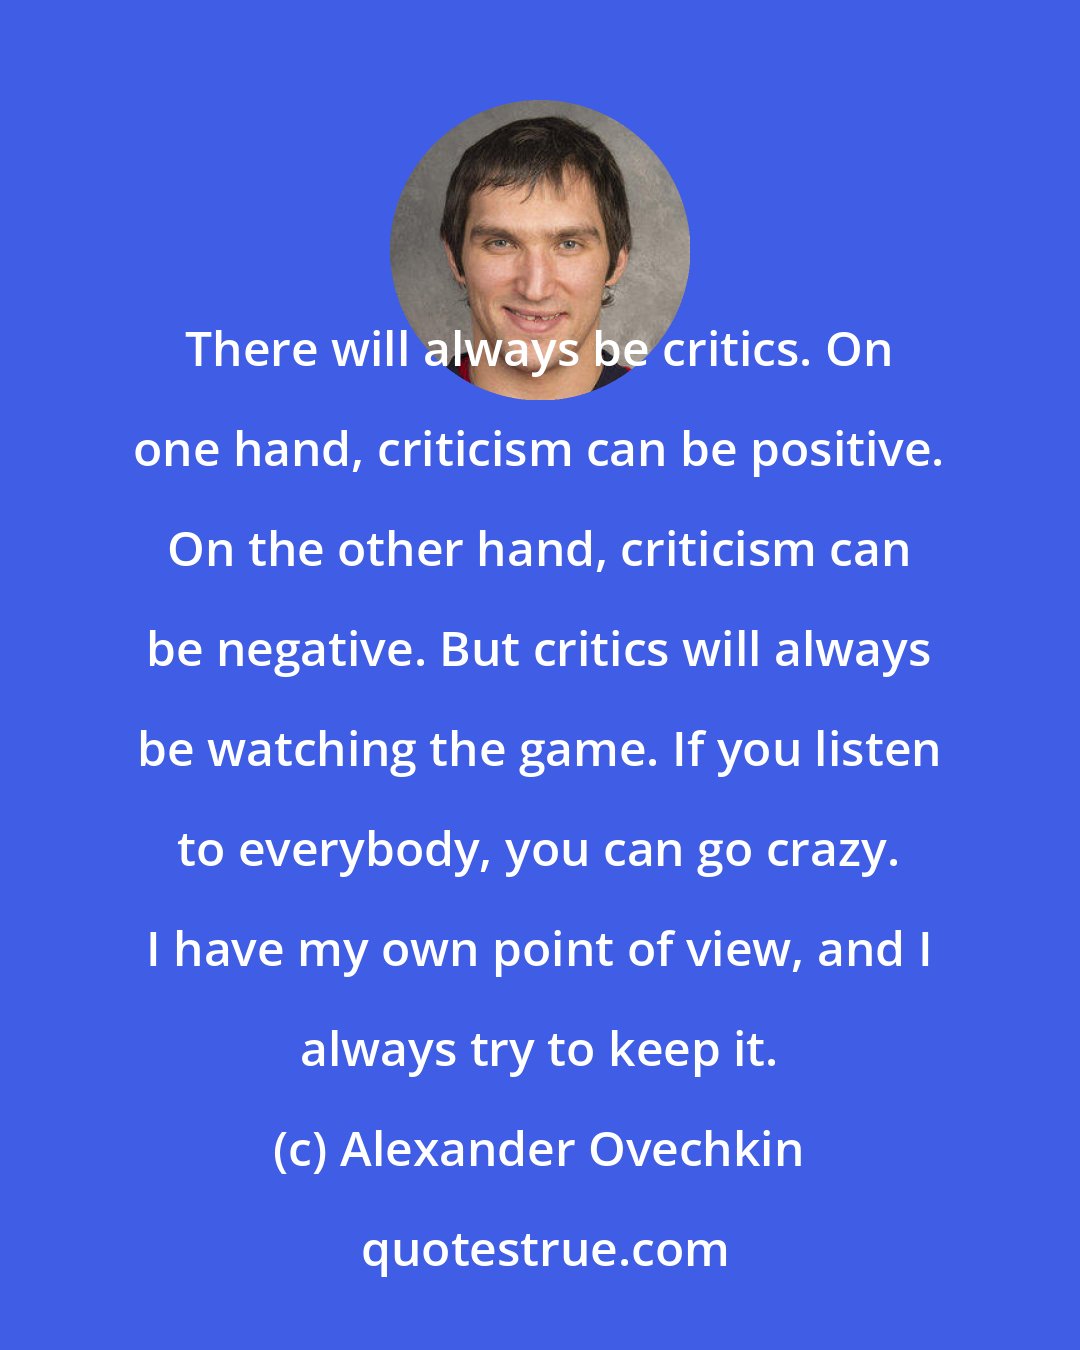 Alexander Ovechkin: There will always be critics. On one hand, criticism can be positive. On the other hand, criticism can be negative. But critics will always be watching the game. If you listen to everybody, you can go crazy. I have my own point of view, and I always try to keep it.